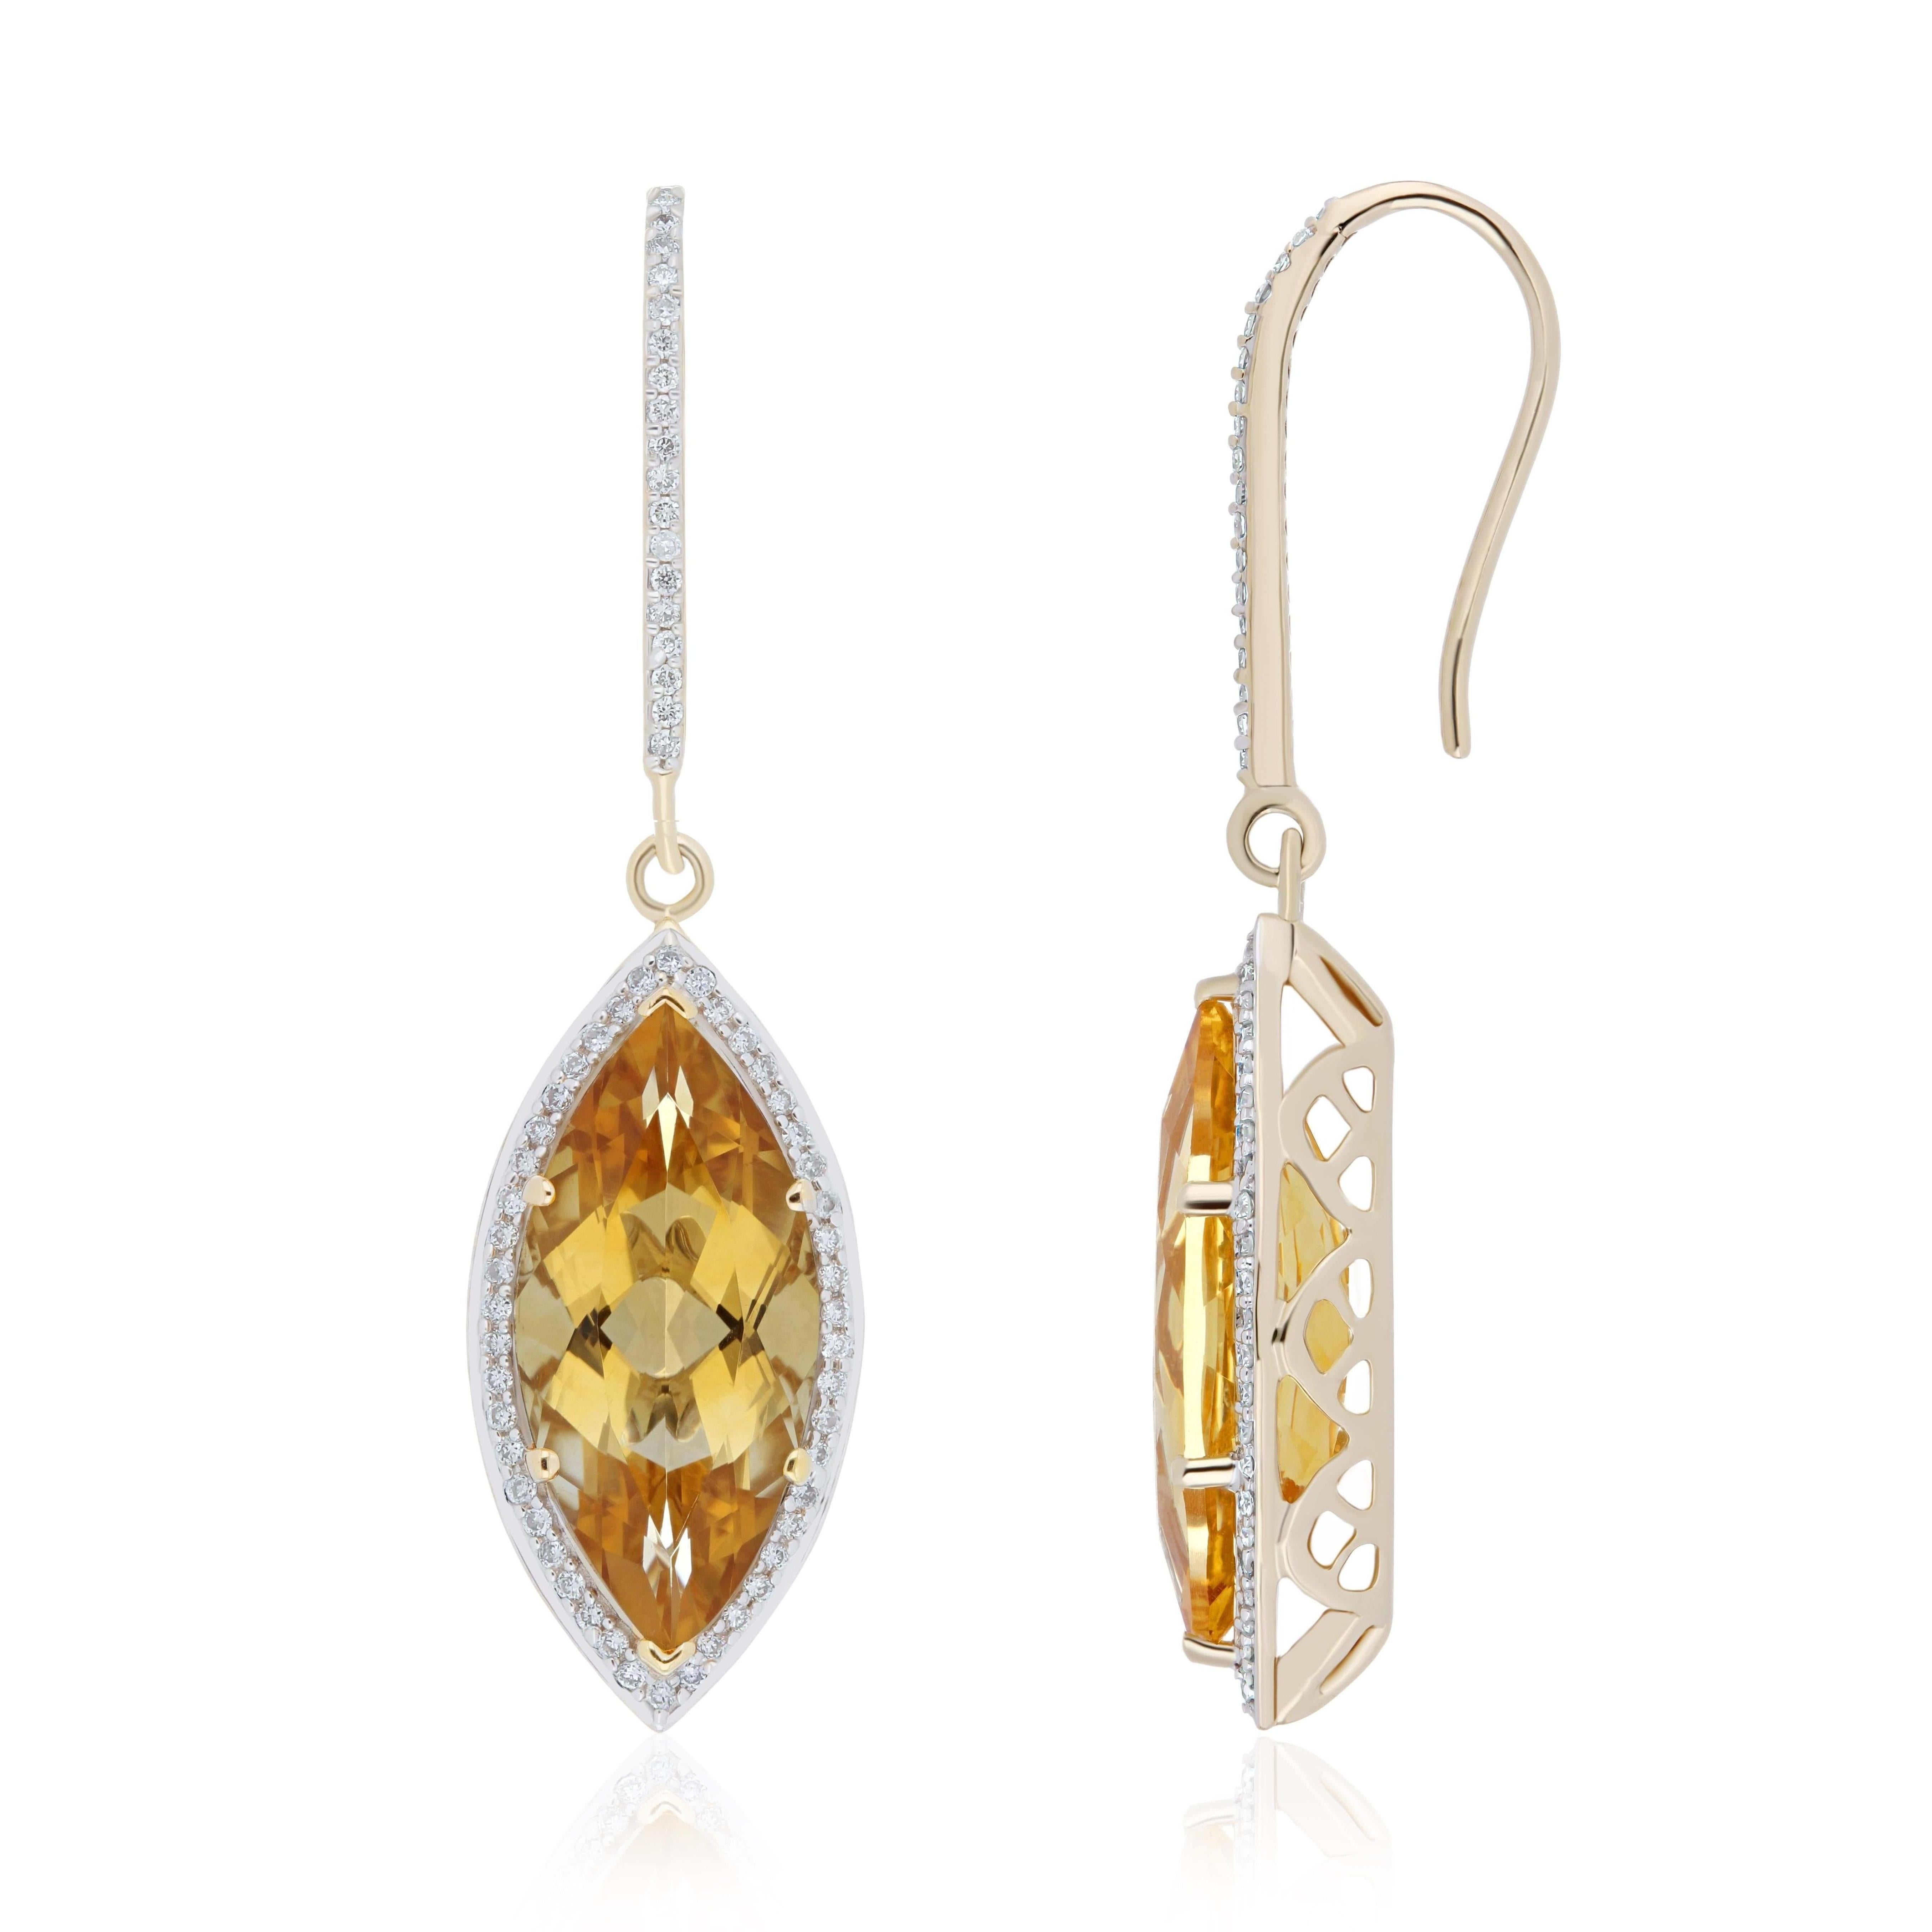 Elegant and Exquisitely Detailed 14 Karat Yellow Gold Earring, Centre Set with 8.86Cts(approx.), Marquise Shape Faceted cut and accented Diamond with 0.31Cts (approx.), 14Karat Yellow Gold Drop Earring Beautiful Hand-crafted Earring

Product